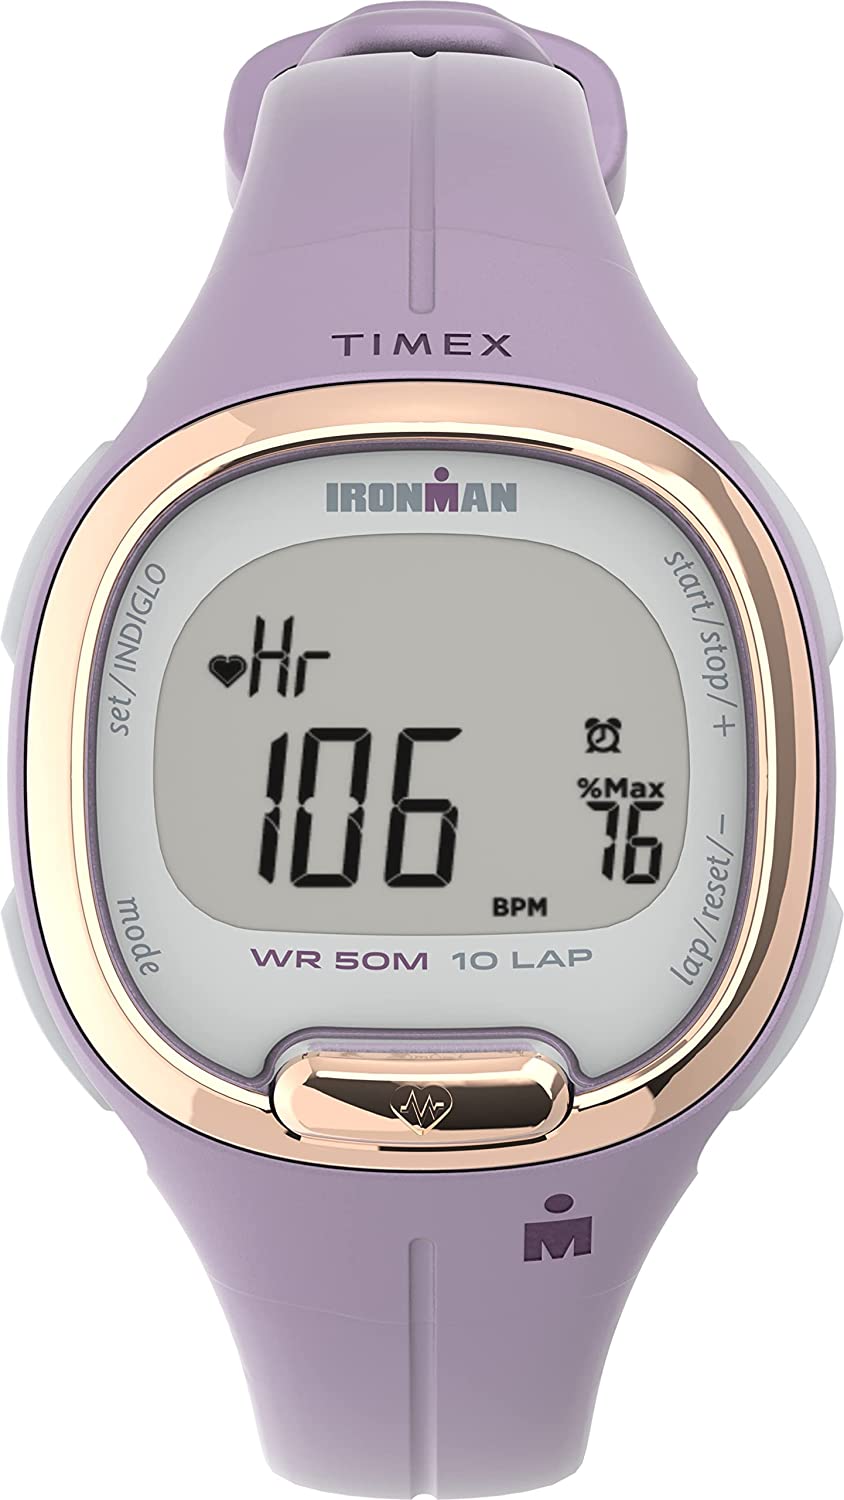 TIMEX WATCH IRONMAN ACTIVITY & HEART RATE TW5M48300GP